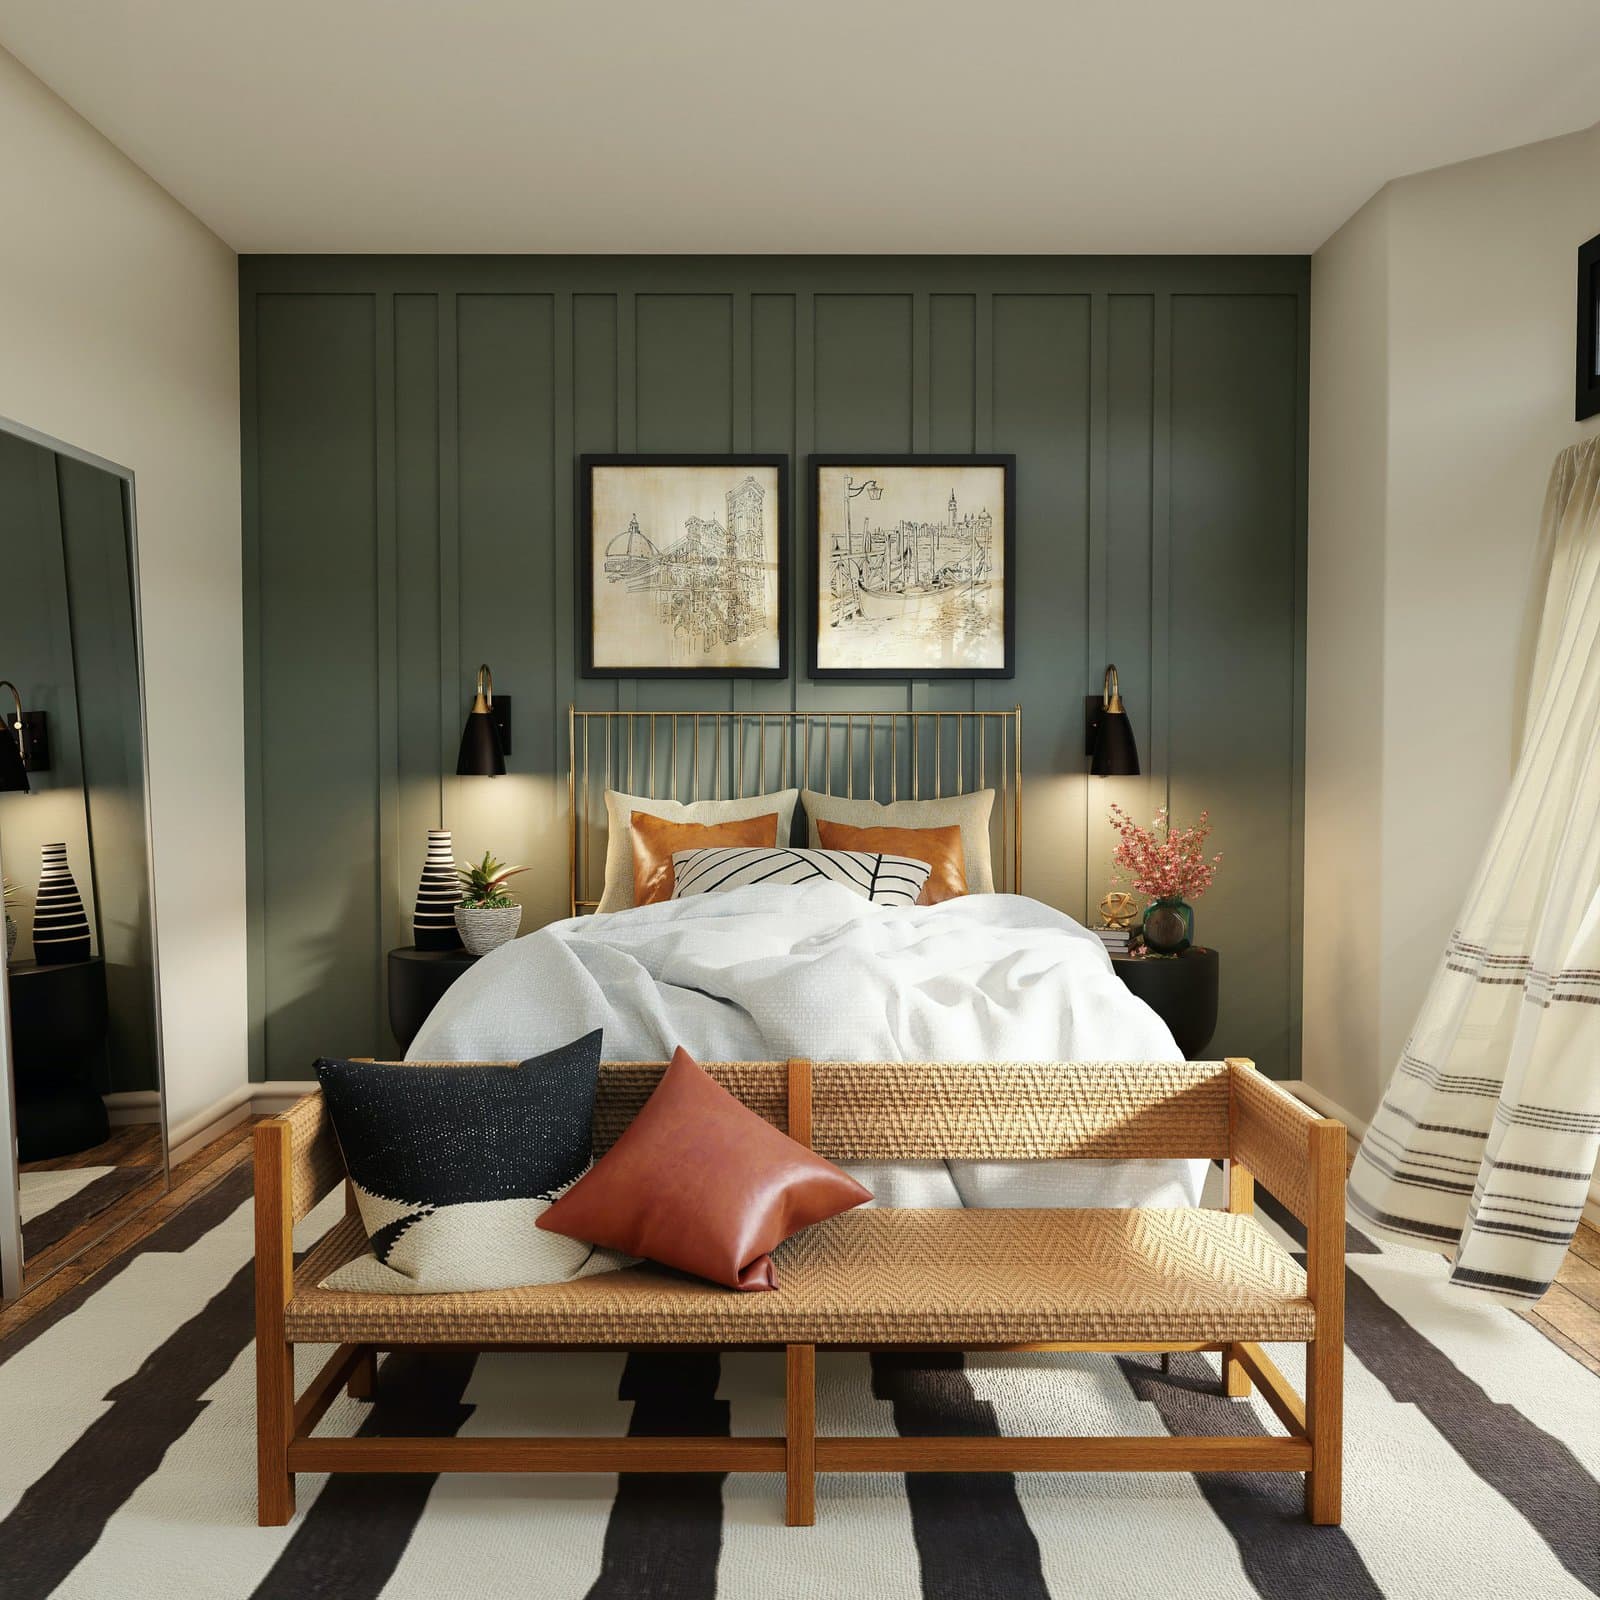 Small Bedroom Accent Wall with Wooden Paneling